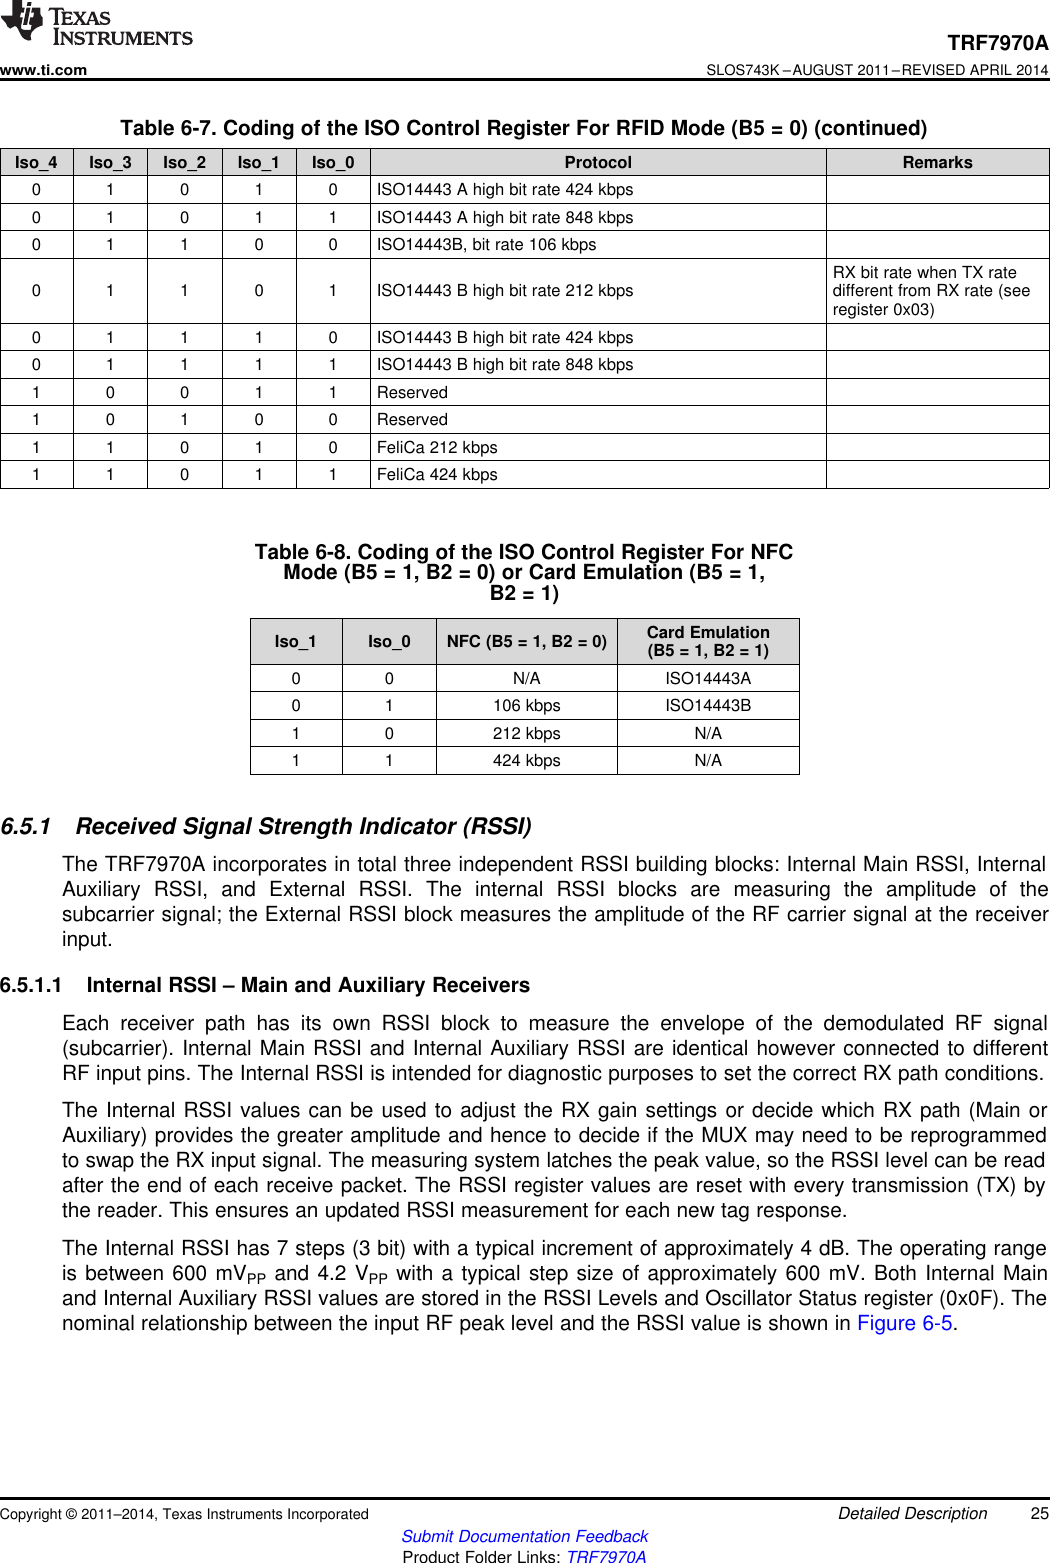 TRF7970Awww.ti.comSLOS743K –AUGUST 2011–REVISED APRIL 2014Table 6-7. Coding of the ISO Control Register For RFID Mode (B5 = 0) (continued)Iso_4 Iso_3 Iso_2 Iso_1 Iso_0 Protocol Remarks0 1 0 1 0 ISO14443 A high bit rate 424 kbps0 1 0 1 1 ISO14443 A high bit rate 848 kbps0 1 1 0 0 ISO14443B, bit rate 106 kbpsRX bit rate when TX rate0 1 1 0 1 ISO14443 B high bit rate 212 kbps different from RX rate (seeregister 0x03)0 1 1 1 0 ISO14443 B high bit rate 424 kbps0 1 1 1 1 ISO14443 B high bit rate 848 kbps1 0 0 1 1 Reserved1 0 1 0 0 Reserved1 1 0 1 0 FeliCa 212 kbps1 1 0 1 1 FeliCa 424 kbpsTable 6-8. Coding of the ISO Control Register For NFCMode (B5 = 1, B2 = 0) or Card Emulation (B5 = 1,B2 = 1)Card EmulationIso_1 Iso_0 NFC (B5 = 1, B2 = 0) (B5 = 1, B2 = 1)0 0 N/A ISO14443A0 1 106 kbps ISO14443B1 0 212 kbps N/A1 1 424 kbps N/A6.5.1 Received Signal Strength Indicator (RSSI)The TRF7970A incorporates in total three independent RSSI building blocks: Internal Main RSSI, InternalAuxiliary RSSI, and External RSSI. The internal RSSI blocks are measuring the amplitude of thesubcarrier signal; the External RSSI block measures the amplitude of the RF carrier signal at the receiverinput.6.5.1.1 Internal RSSI – Main and Auxiliary ReceiversEach receiver path has its own RSSI block to measure the envelope of the demodulated RF signal(subcarrier). Internal Main RSSI and Internal Auxiliary RSSI are identical however connected to differentRF input pins. The Internal RSSI is intended for diagnostic purposes to set the correct RX path conditions.The Internal RSSI values can be used to adjust the RX gain settings or decide which RX path (Main orAuxiliary) provides the greater amplitude and hence to decide if the MUX may need to be reprogrammedto swap the RX input signal. The measuring system latches the peak value, so the RSSI level can be readafter the end of each receive packet. The RSSI register values are reset with every transmission (TX) bythe reader. This ensures an updated RSSI measurement for each new tag response.The Internal RSSI has 7 steps (3 bit) with a typical increment of approximately 4 dB. The operating rangeis between 600 mVPP and 4.2 VPP with a typical step size of approximately 600 mV. Both Internal Mainand Internal Auxiliary RSSI values are stored in the RSSI Levels and Oscillator Status register (0x0F). Thenominal relationship between the input RF peak level and the RSSI value is shown in Figure 6-5.Copyright © 2011–2014, Texas Instruments Incorporated Detailed Description 25Submit Documentation FeedbackProduct Folder Links: TRF7970A